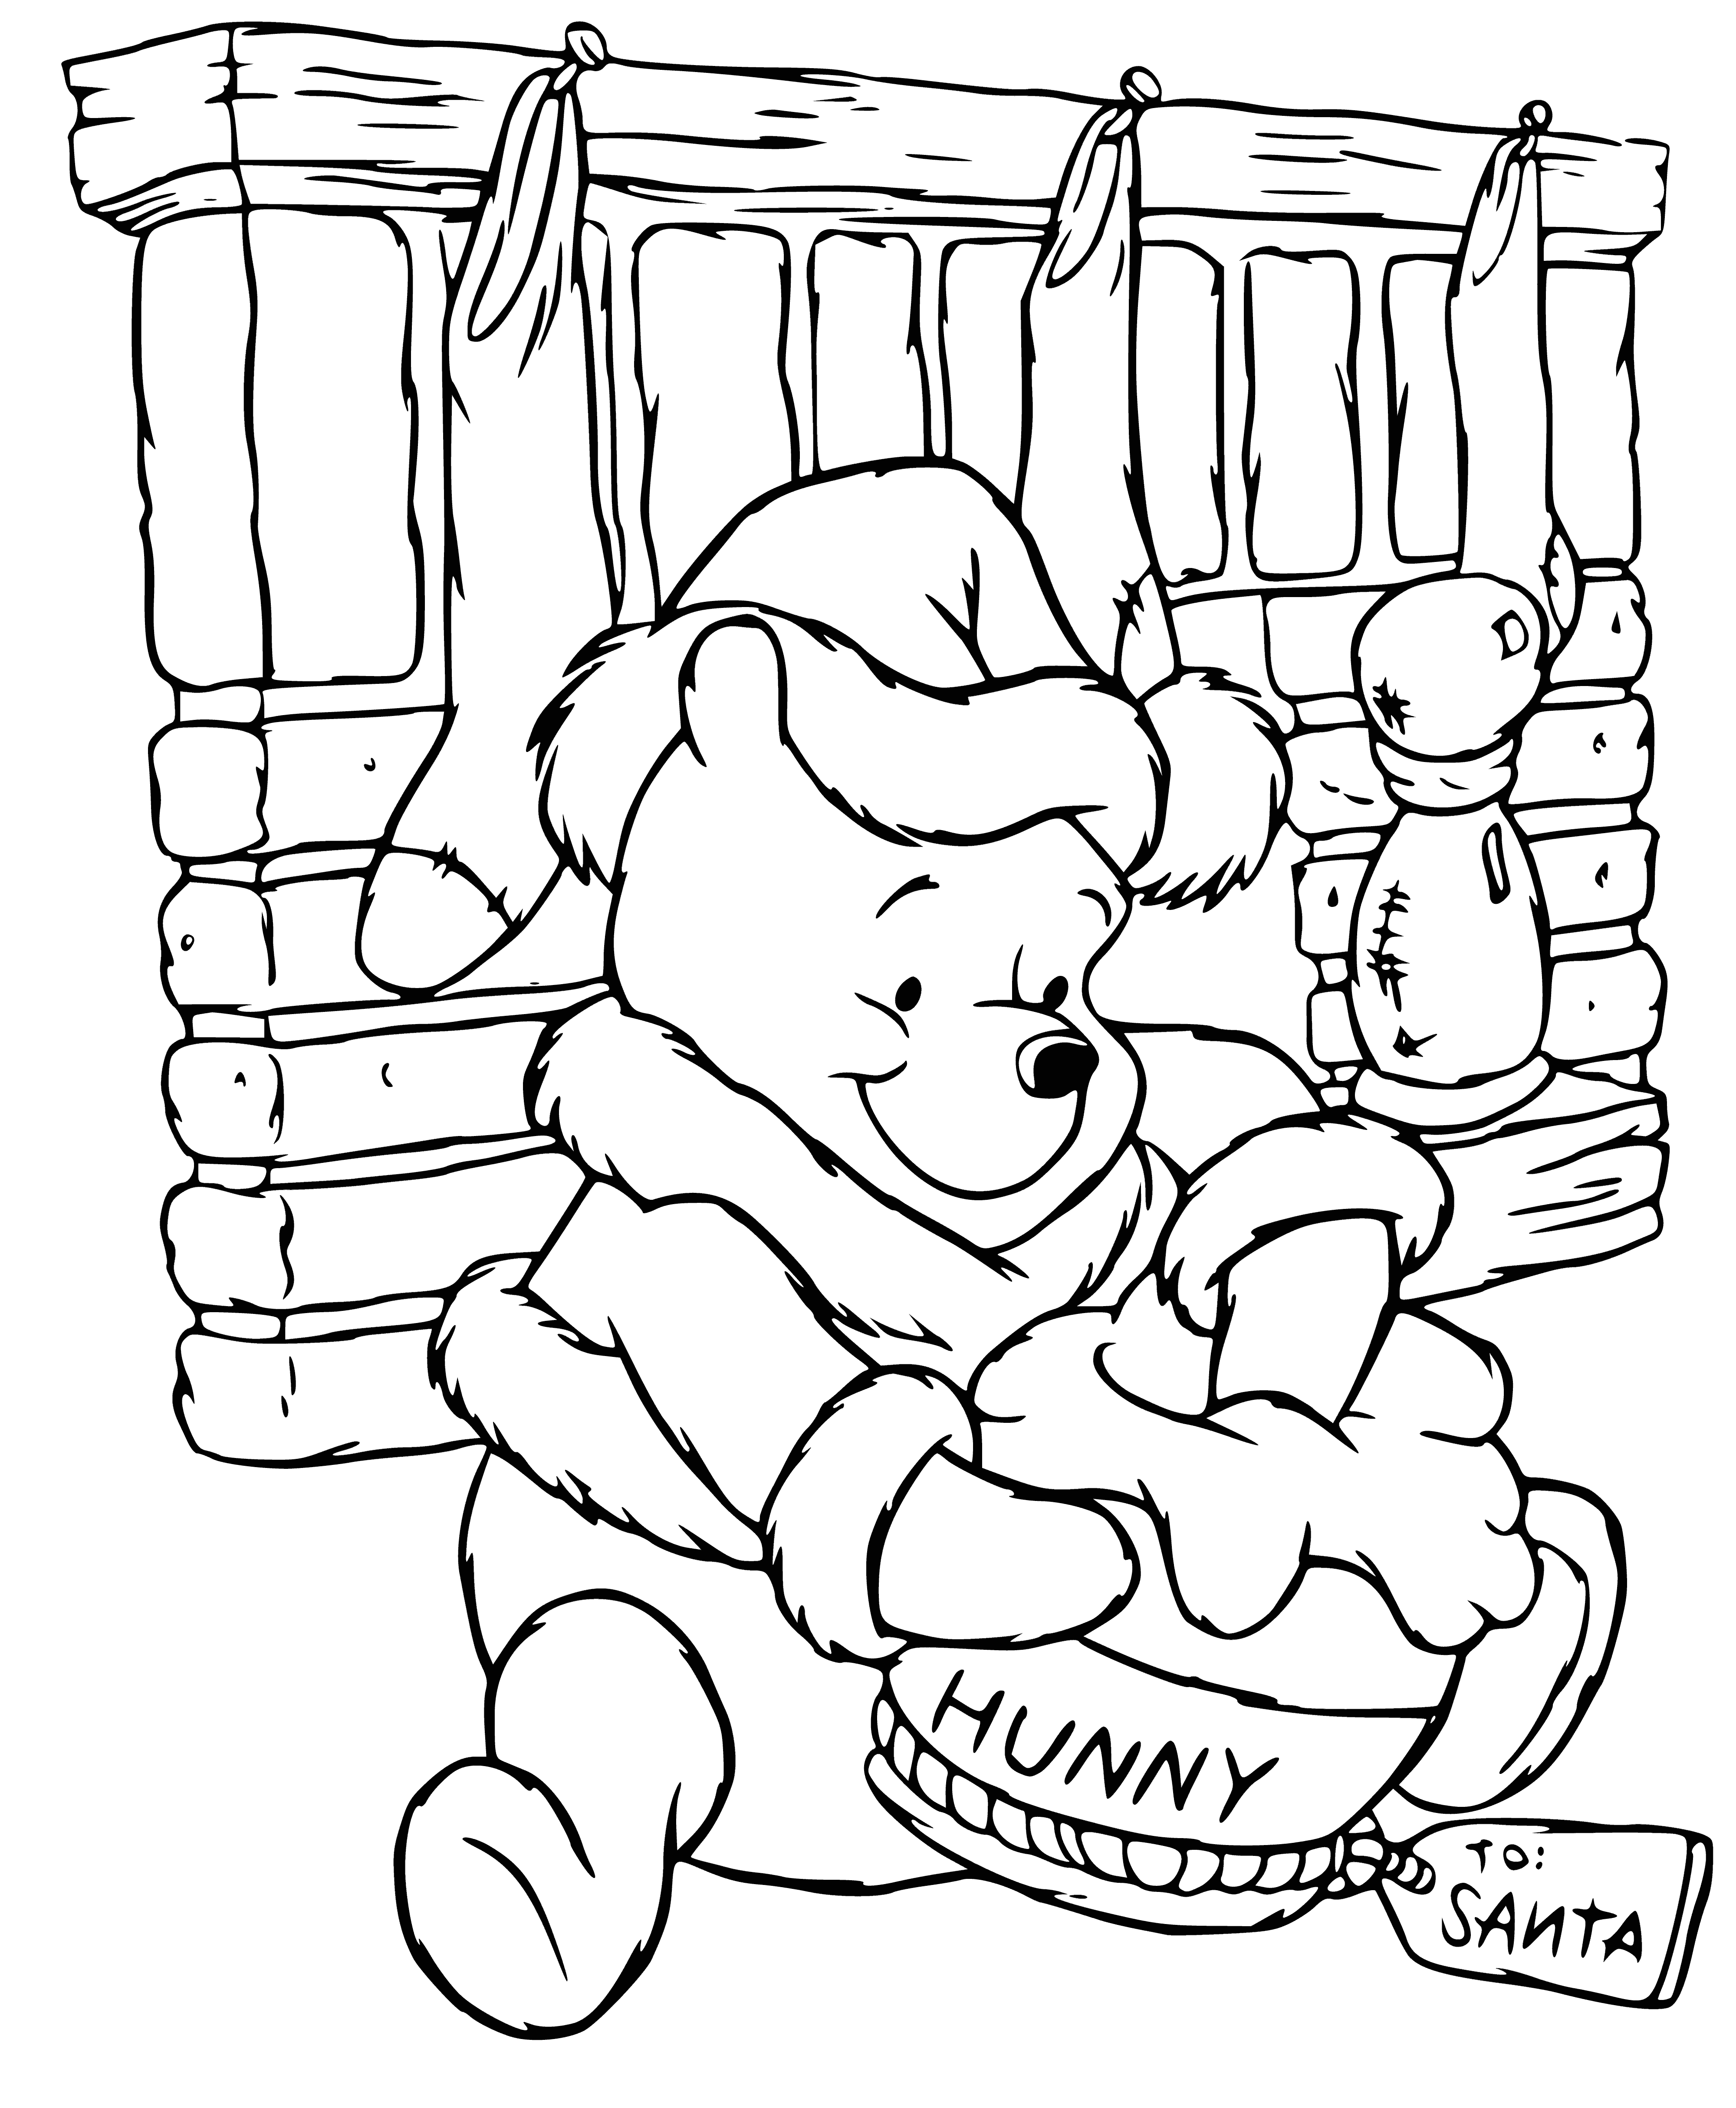 coloring page: Winnie & Disney pals cheer & raise glasses of champagne to celebrate the New Year in front of the fireplace. Excitement in the air!